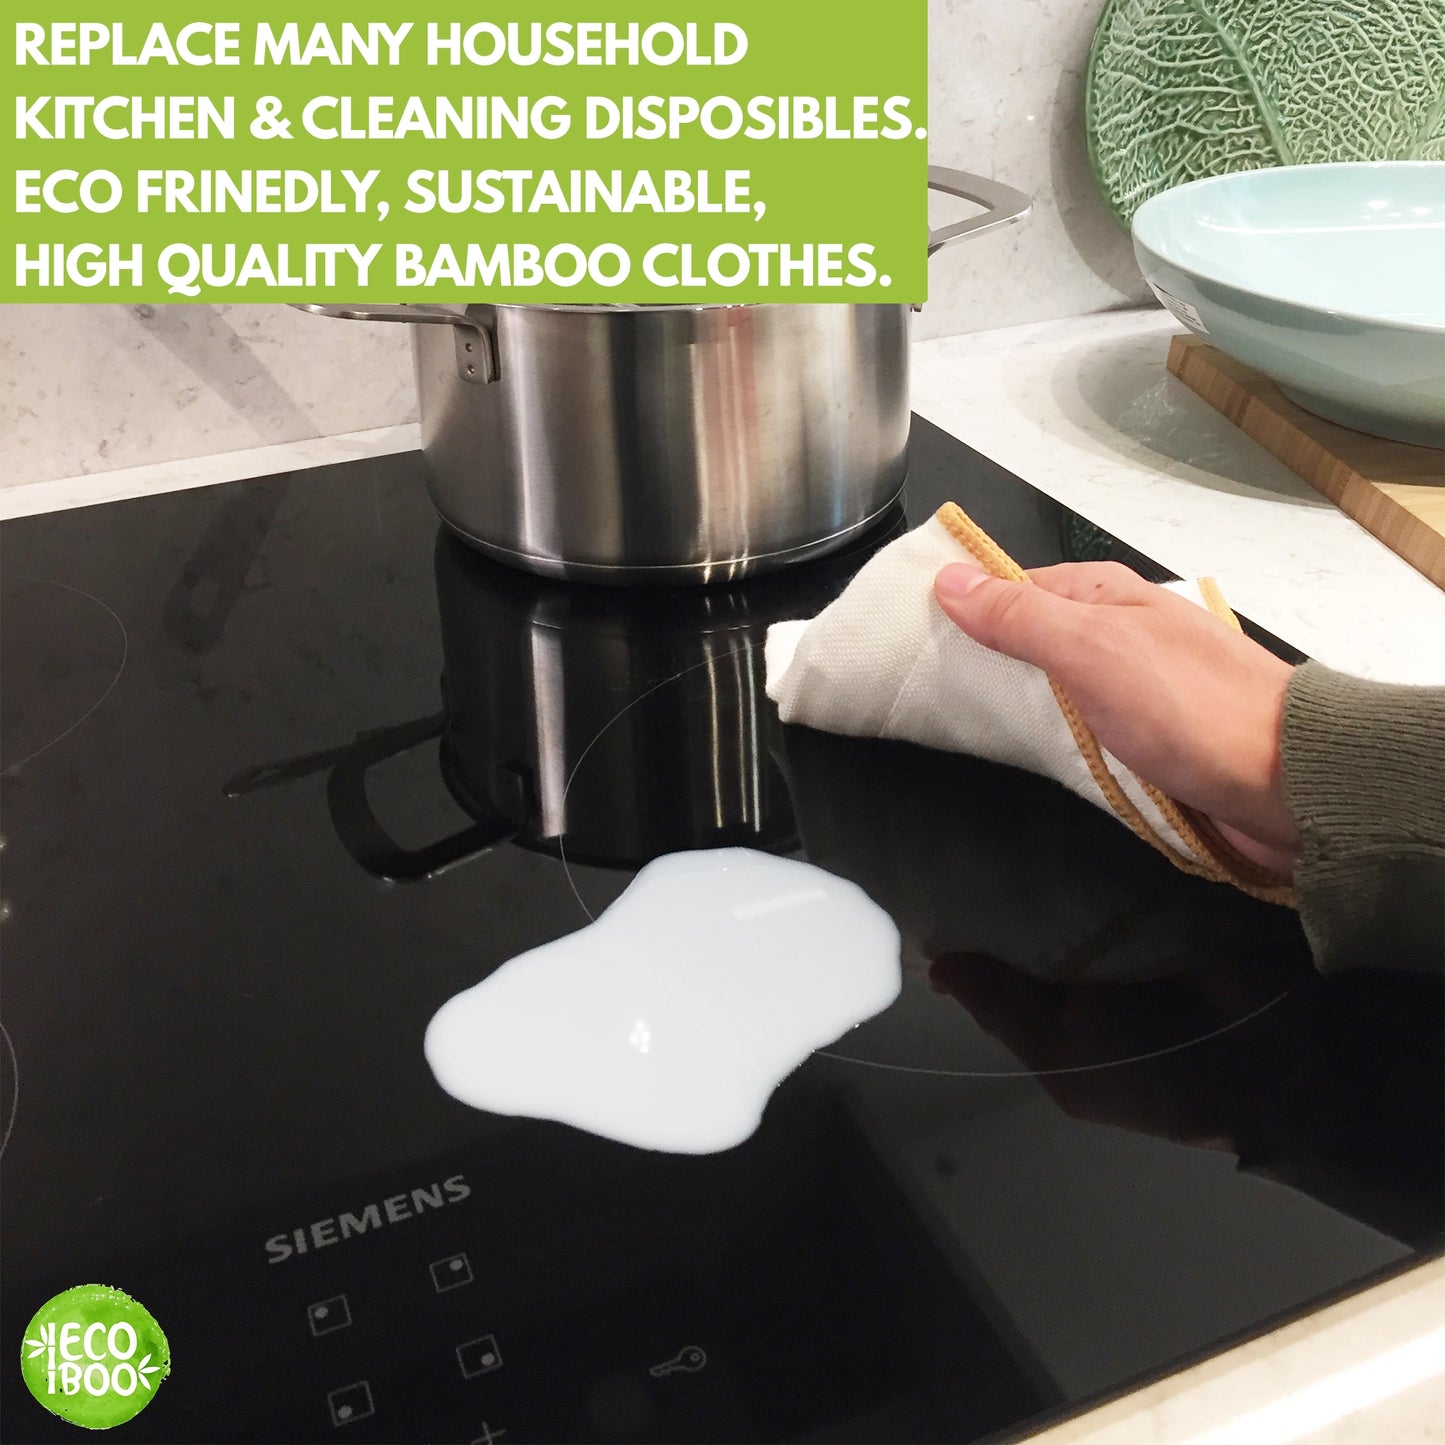 Bamboo cleaning cloth - super absorbent- ecofriendly alternative to paper towels for cleaning stoves and countertops